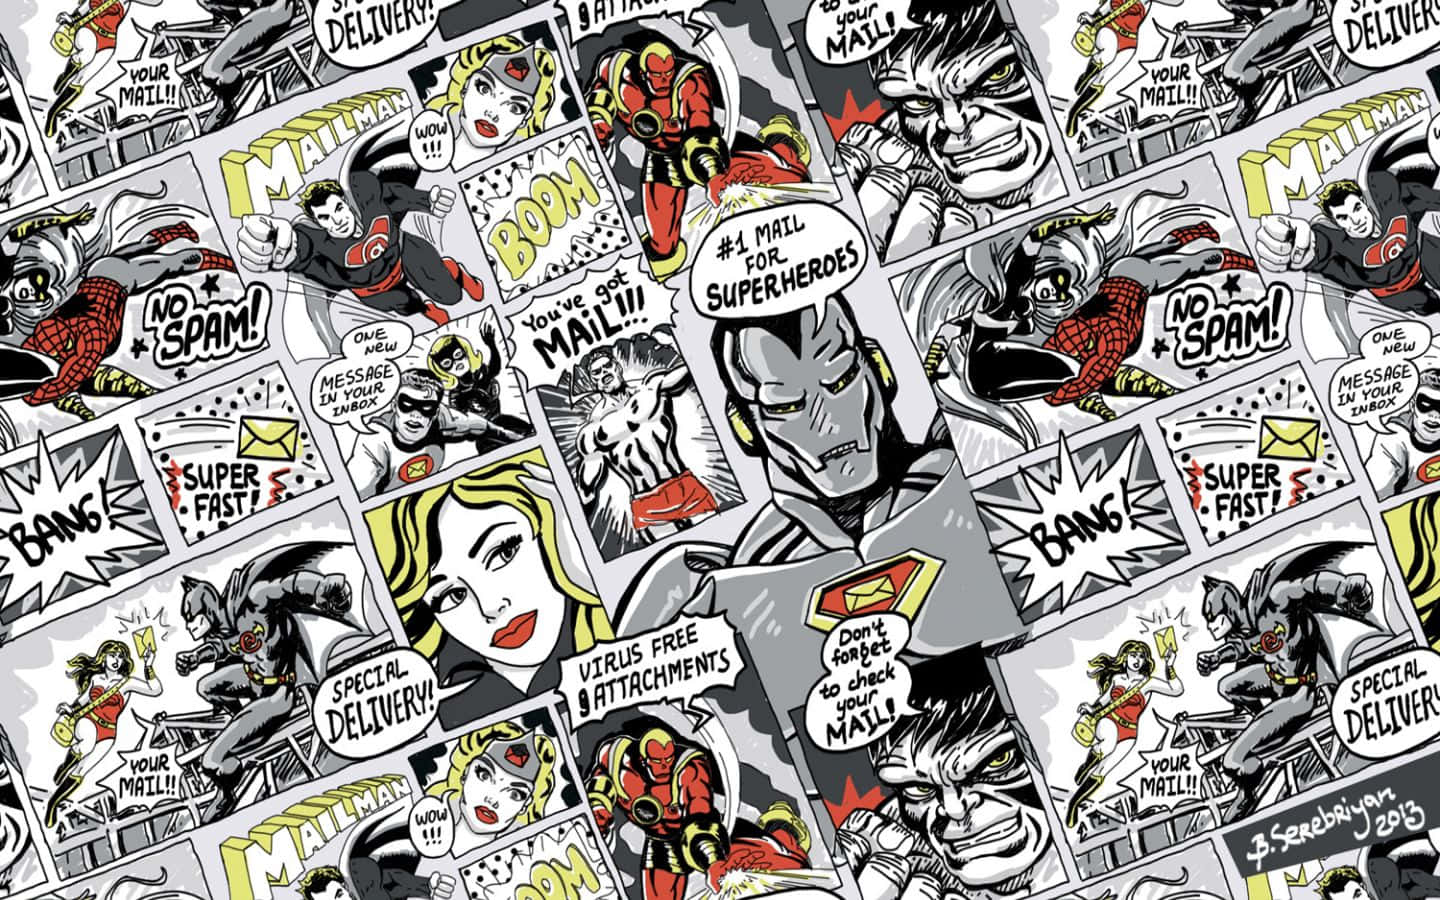 Pop culture collides in this vibrant comic book background